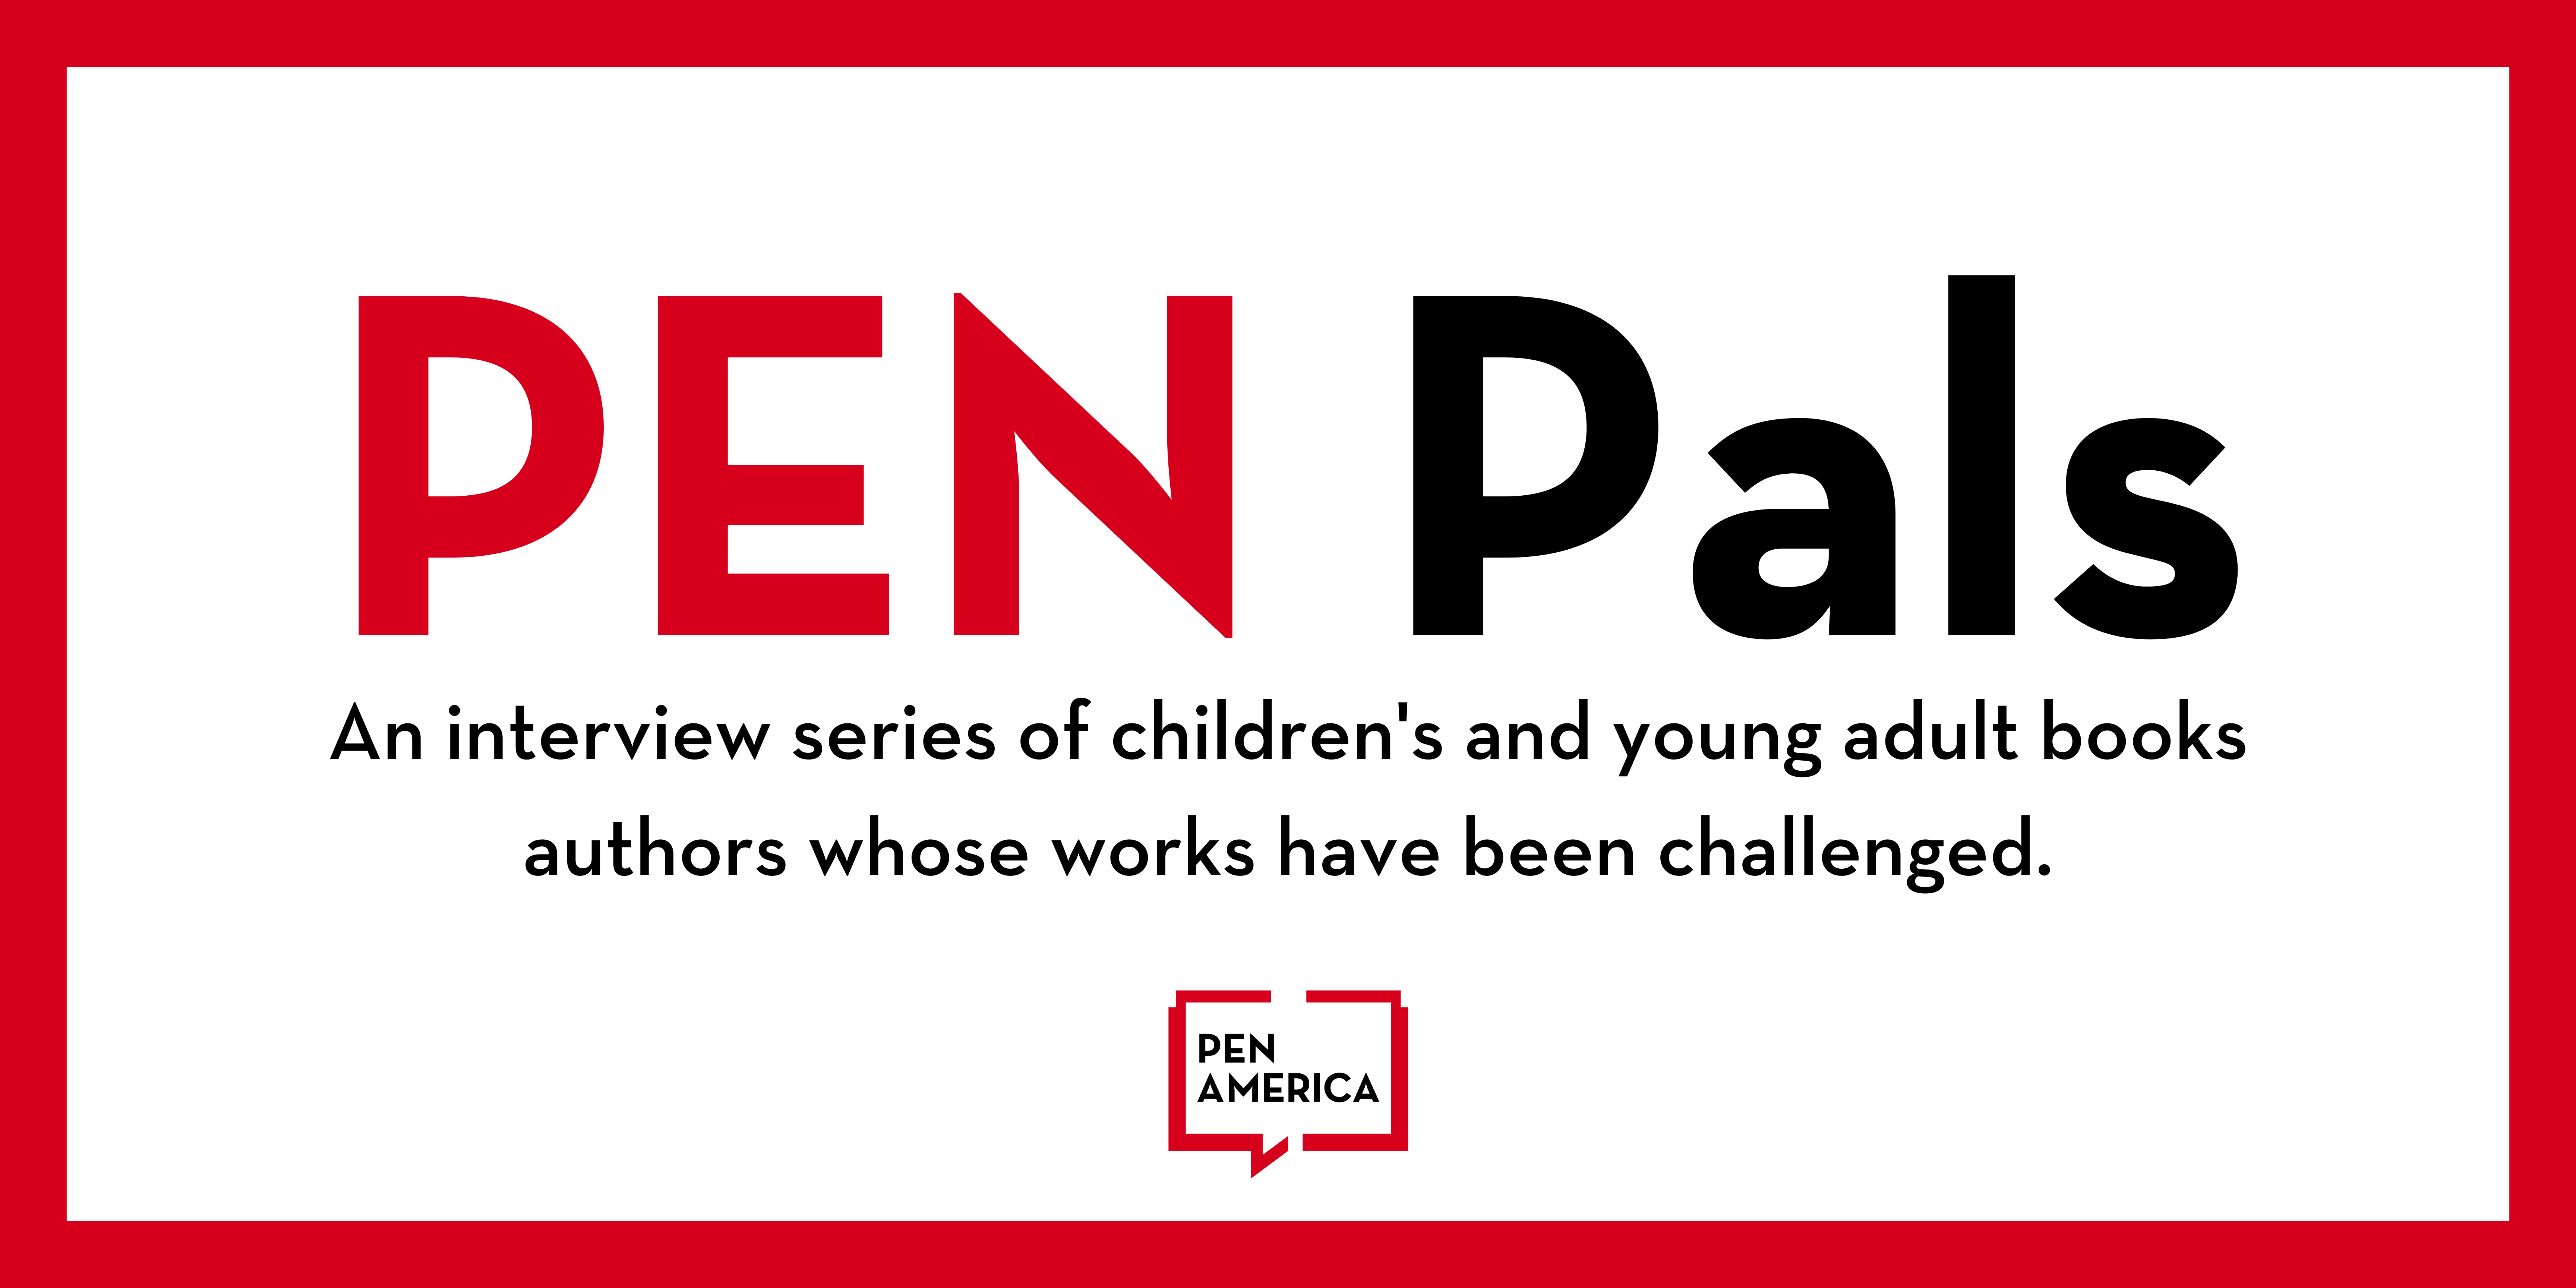 The words, "PEN Pals: An interview series of children's and young adult books authors whose works have been challenged."